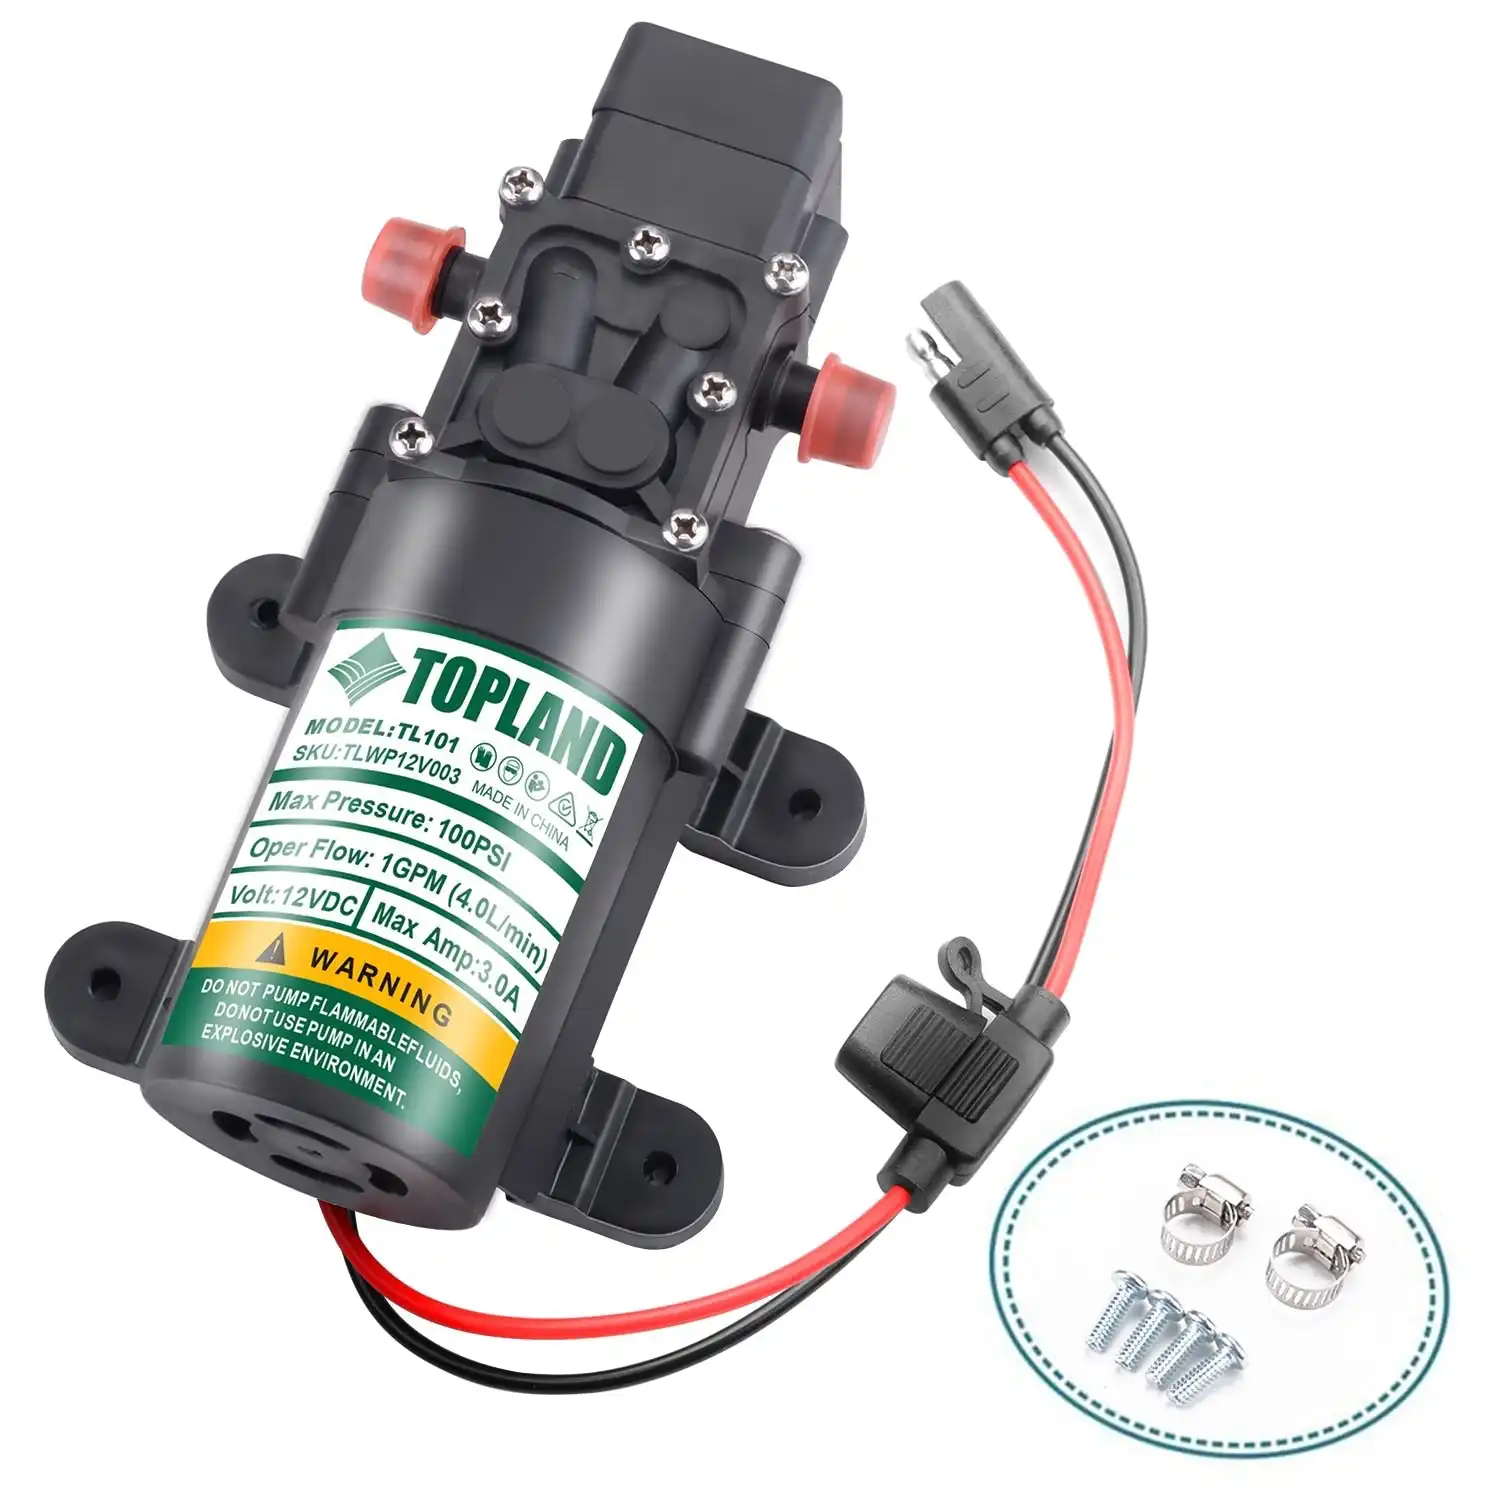 Topland 12V Portable Diaphragm Water Pump with Safety Accessories Pressure Self Priming